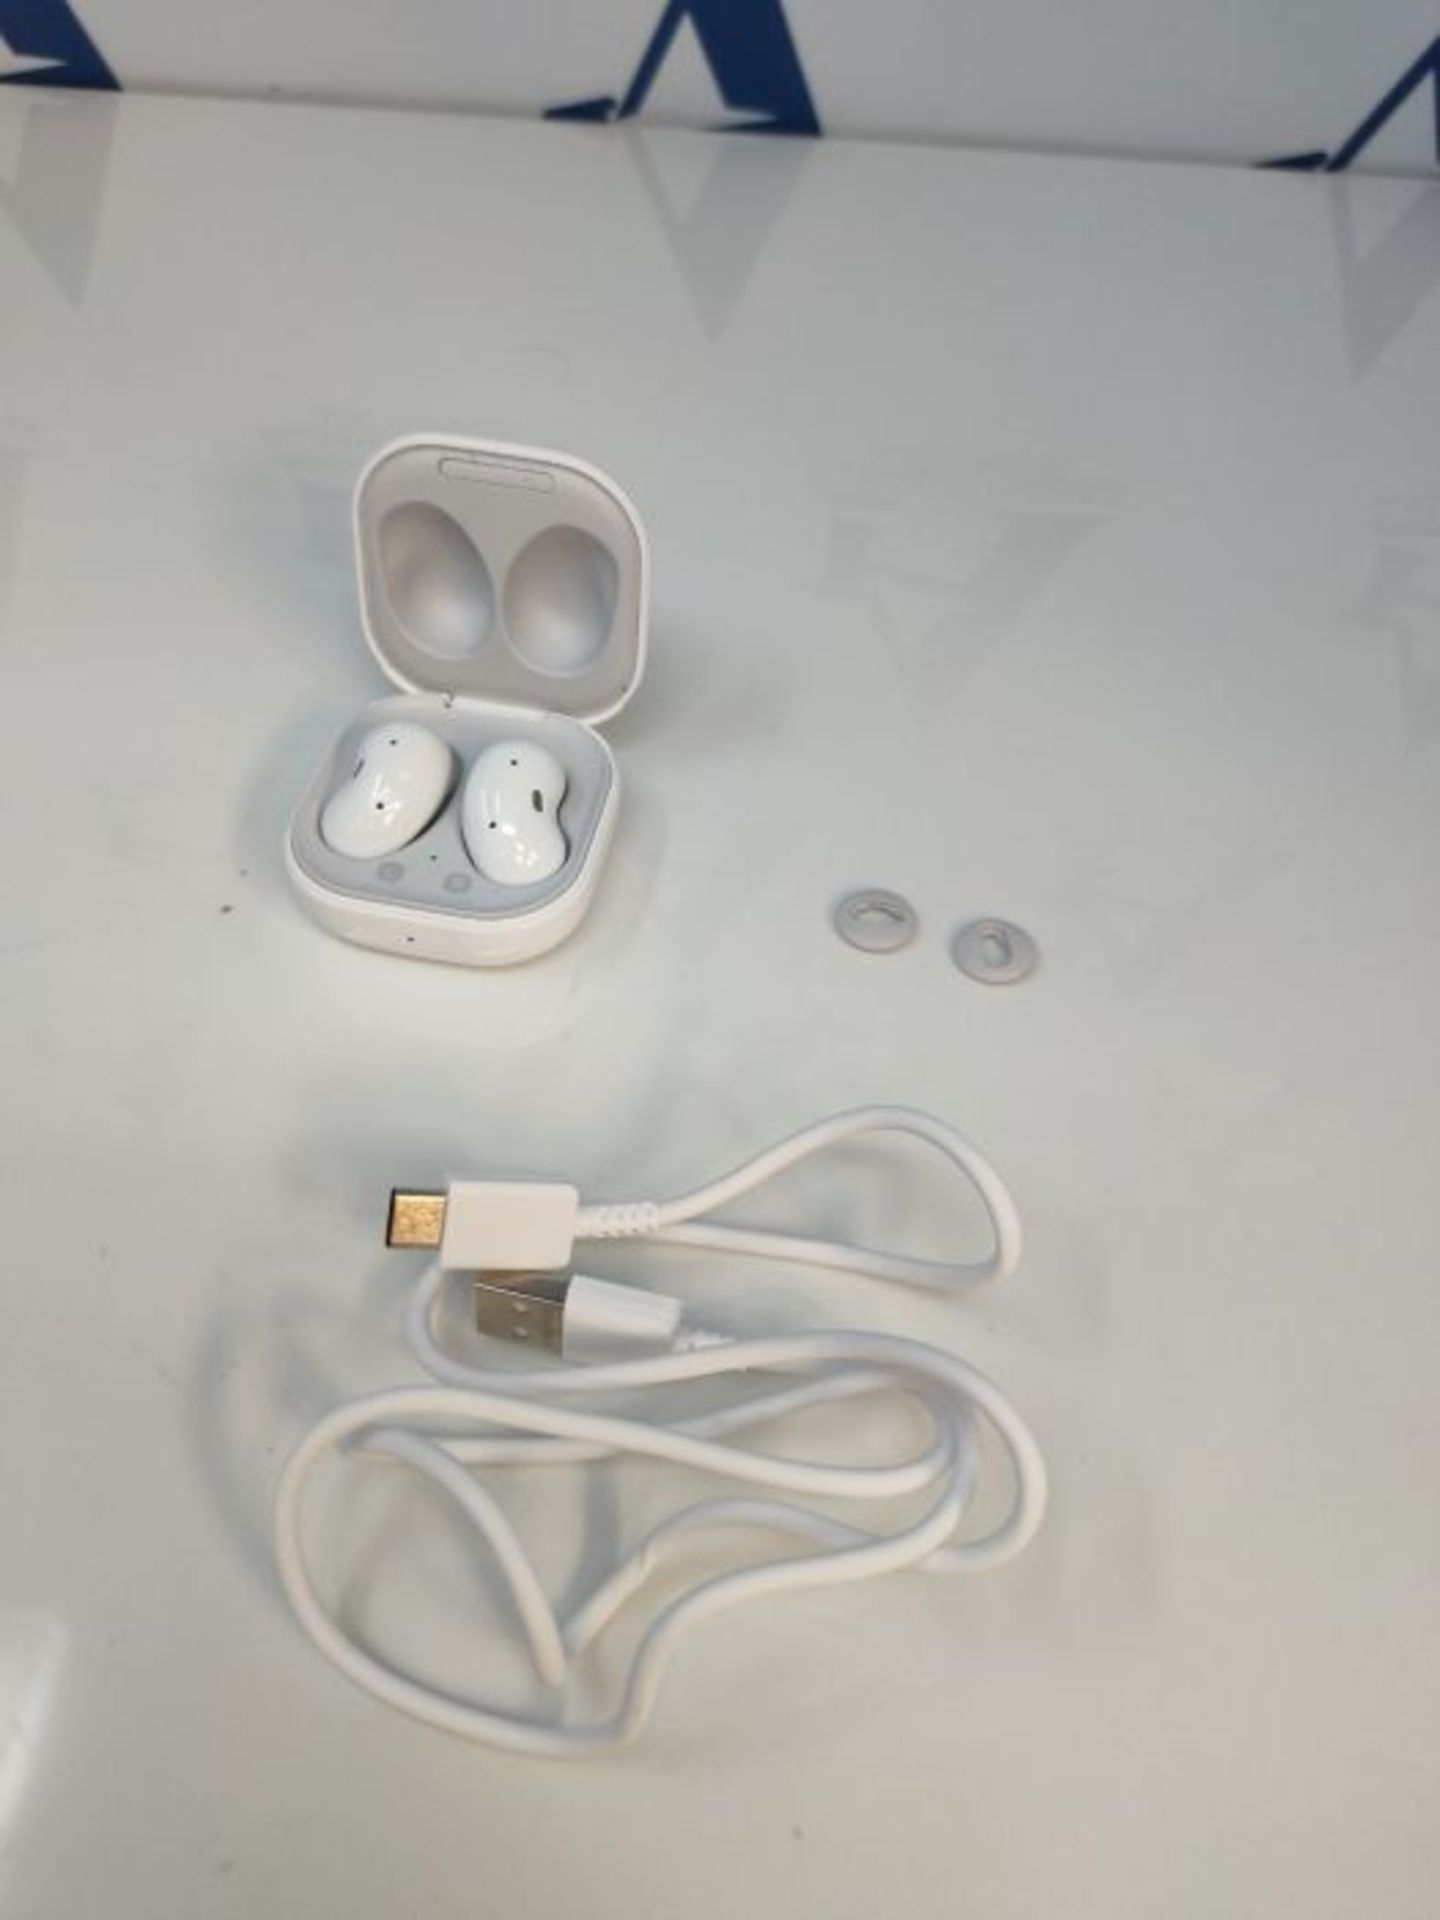 RRP £129.00 Samsung Galaxy Buds Live Wireless Earphones Mystic White (UK Version) - Image 3 of 3